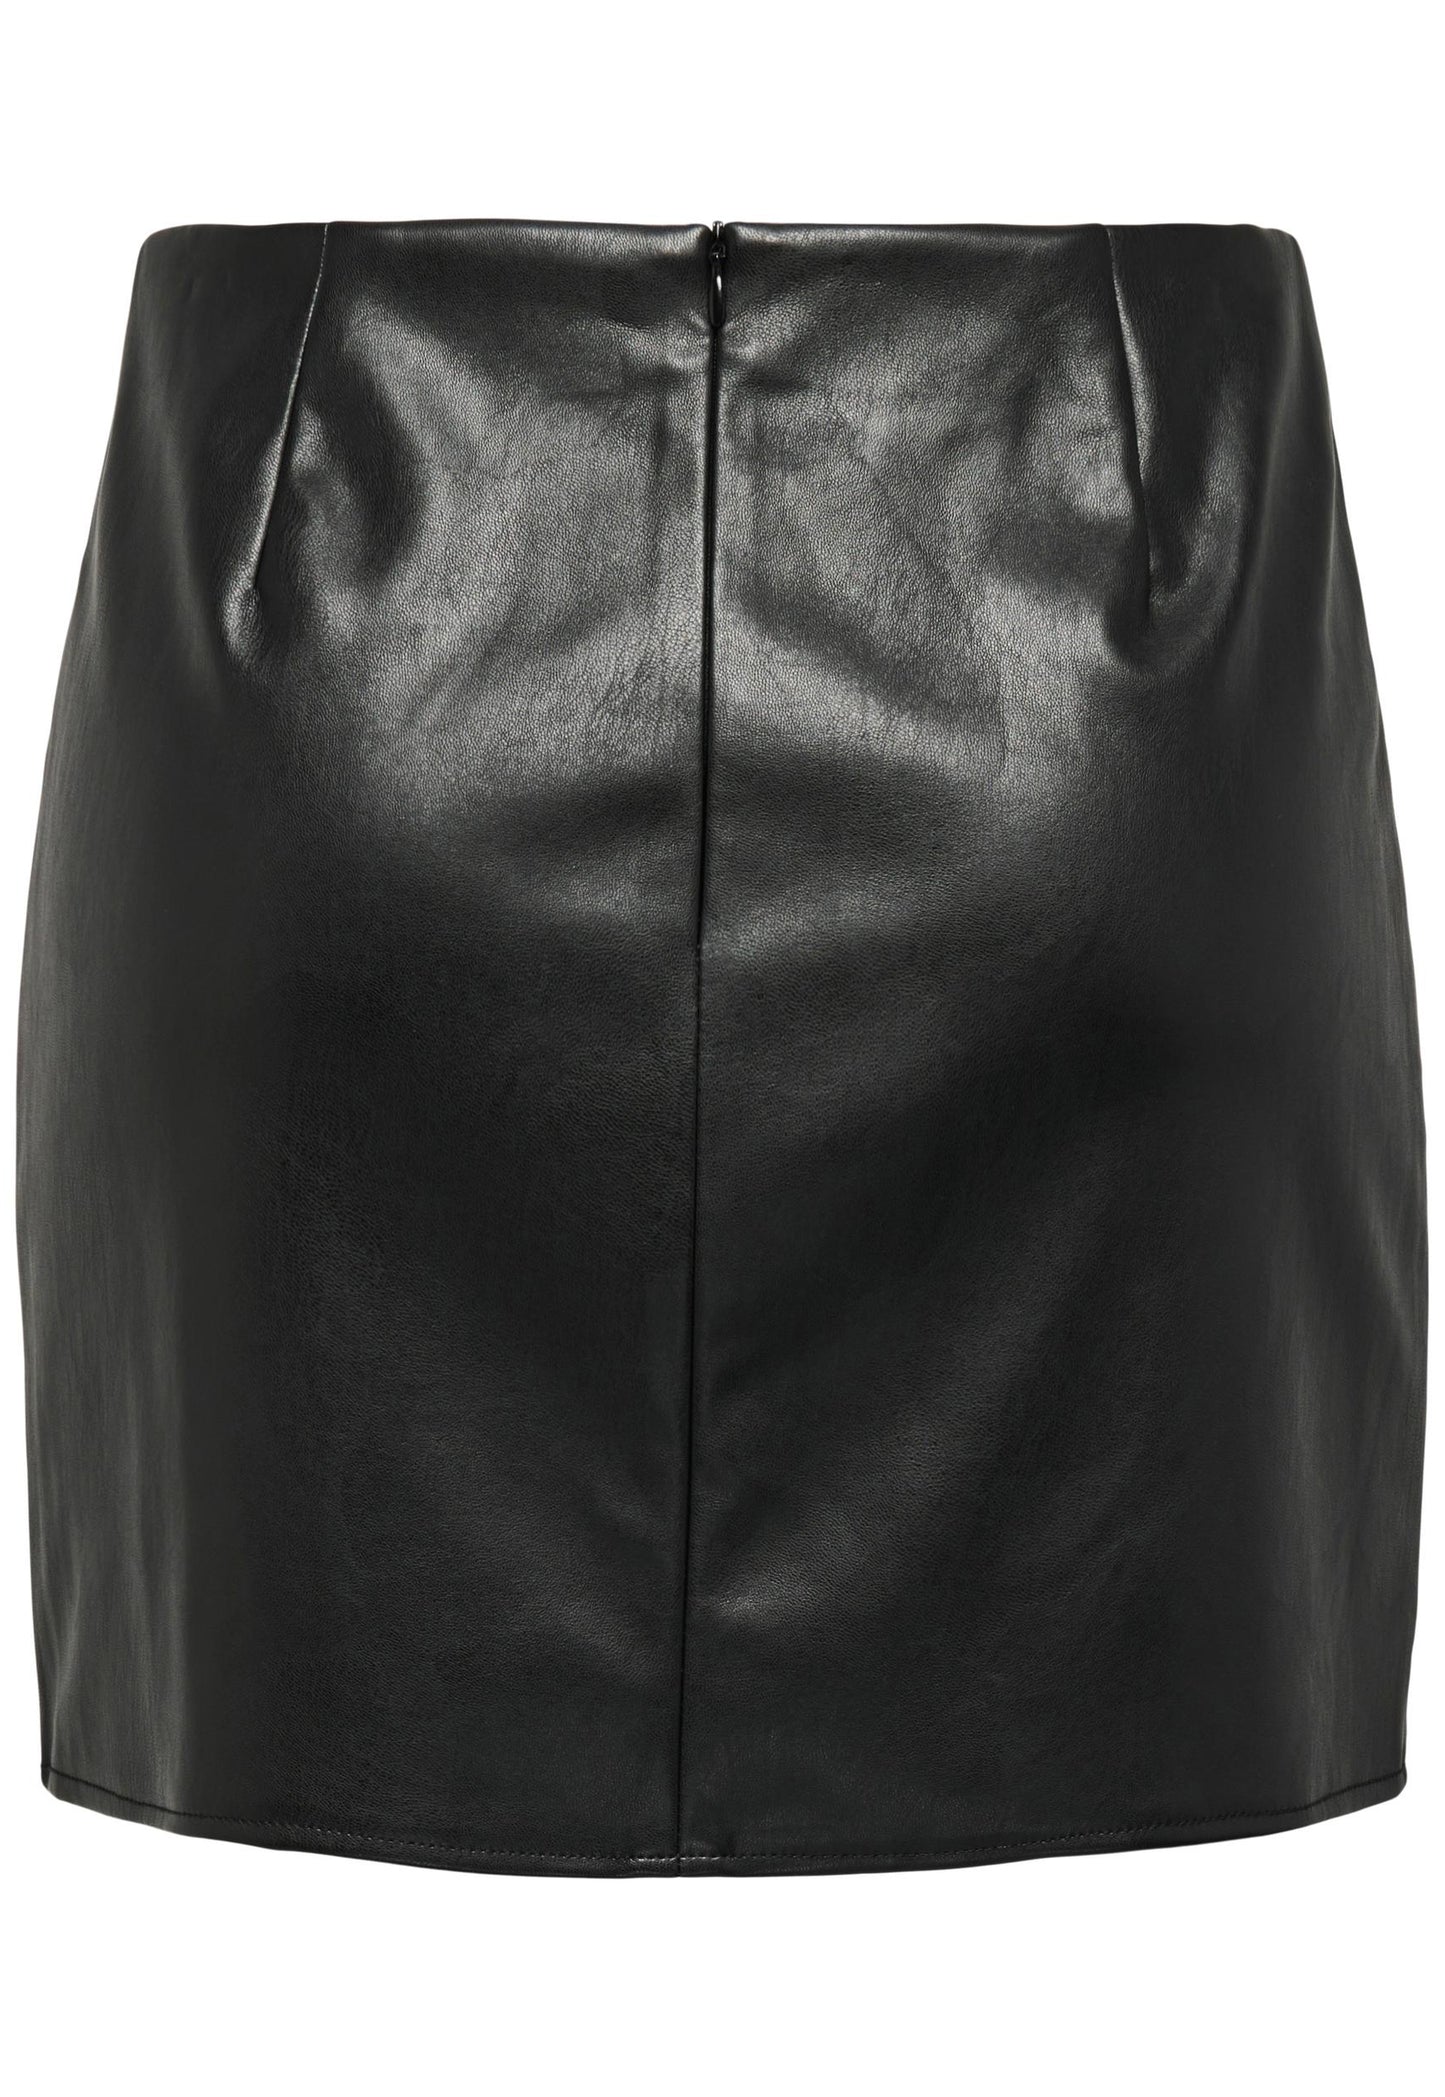 
                  
                    ONLY High Waisted Faux Leather Mini Skirt with Slit in Black - One Nation Clothing
                  
                